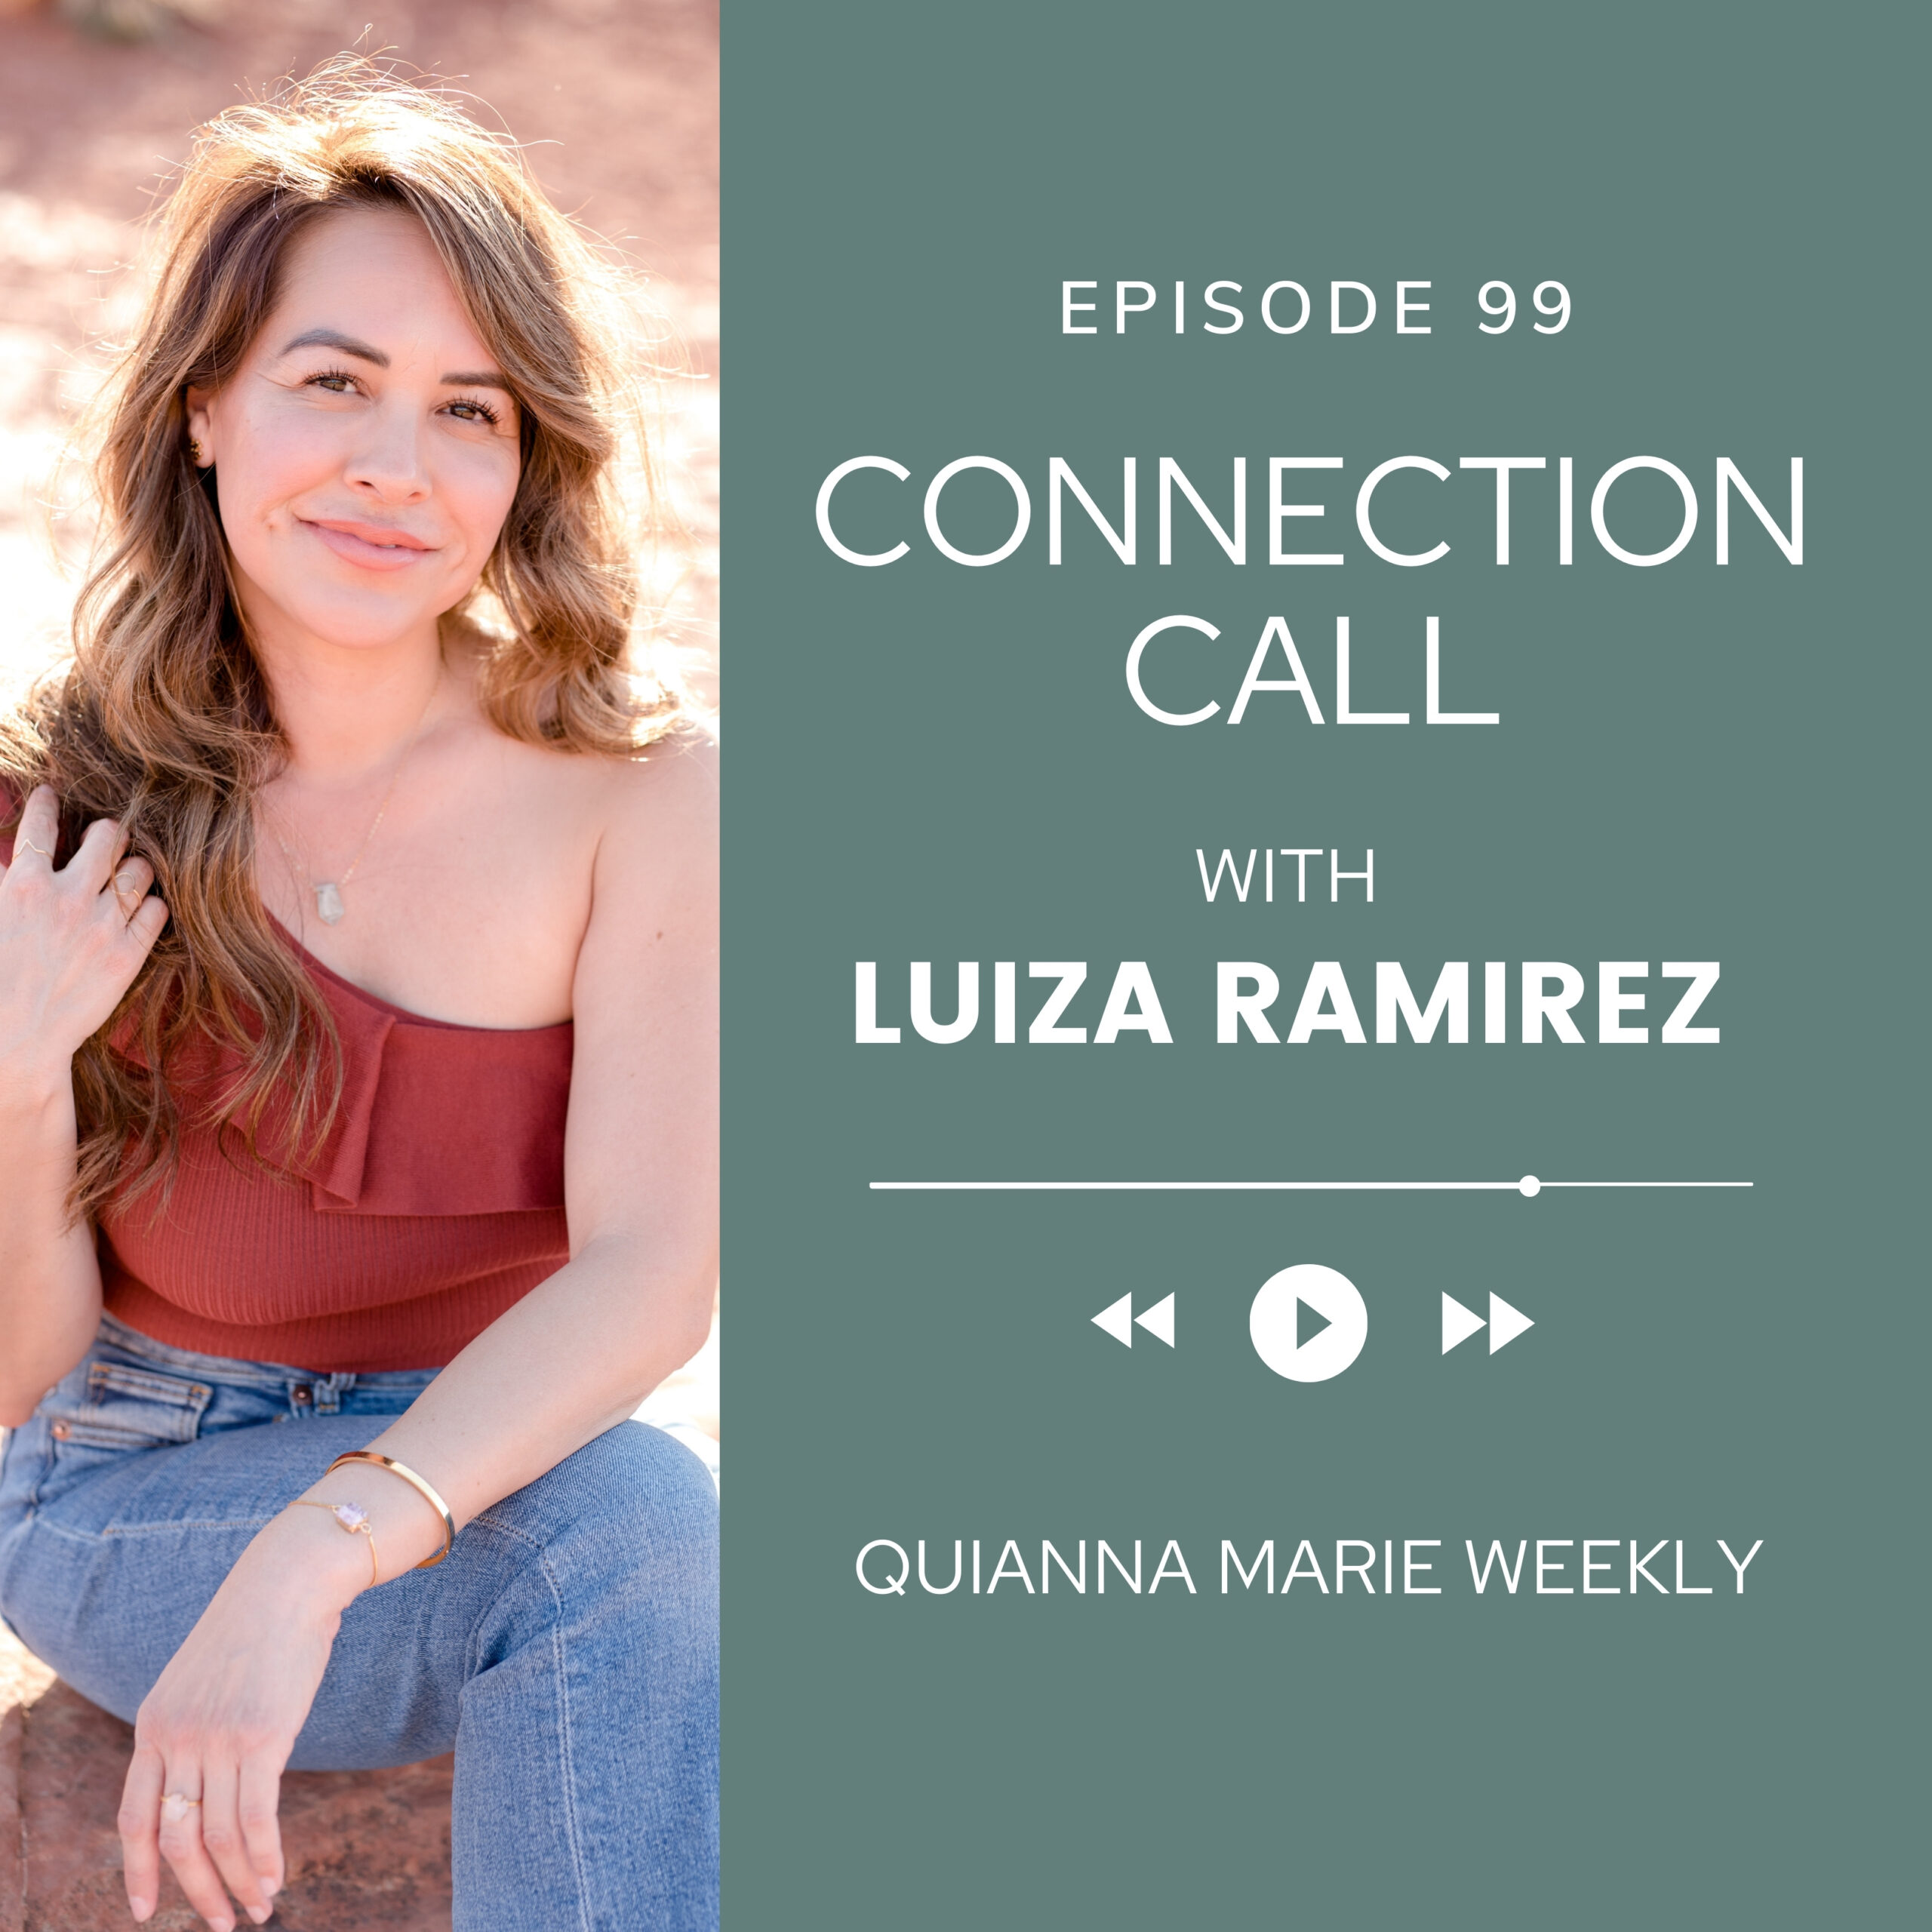 Connection Call with Luiza Ramirez and Quianna Marie